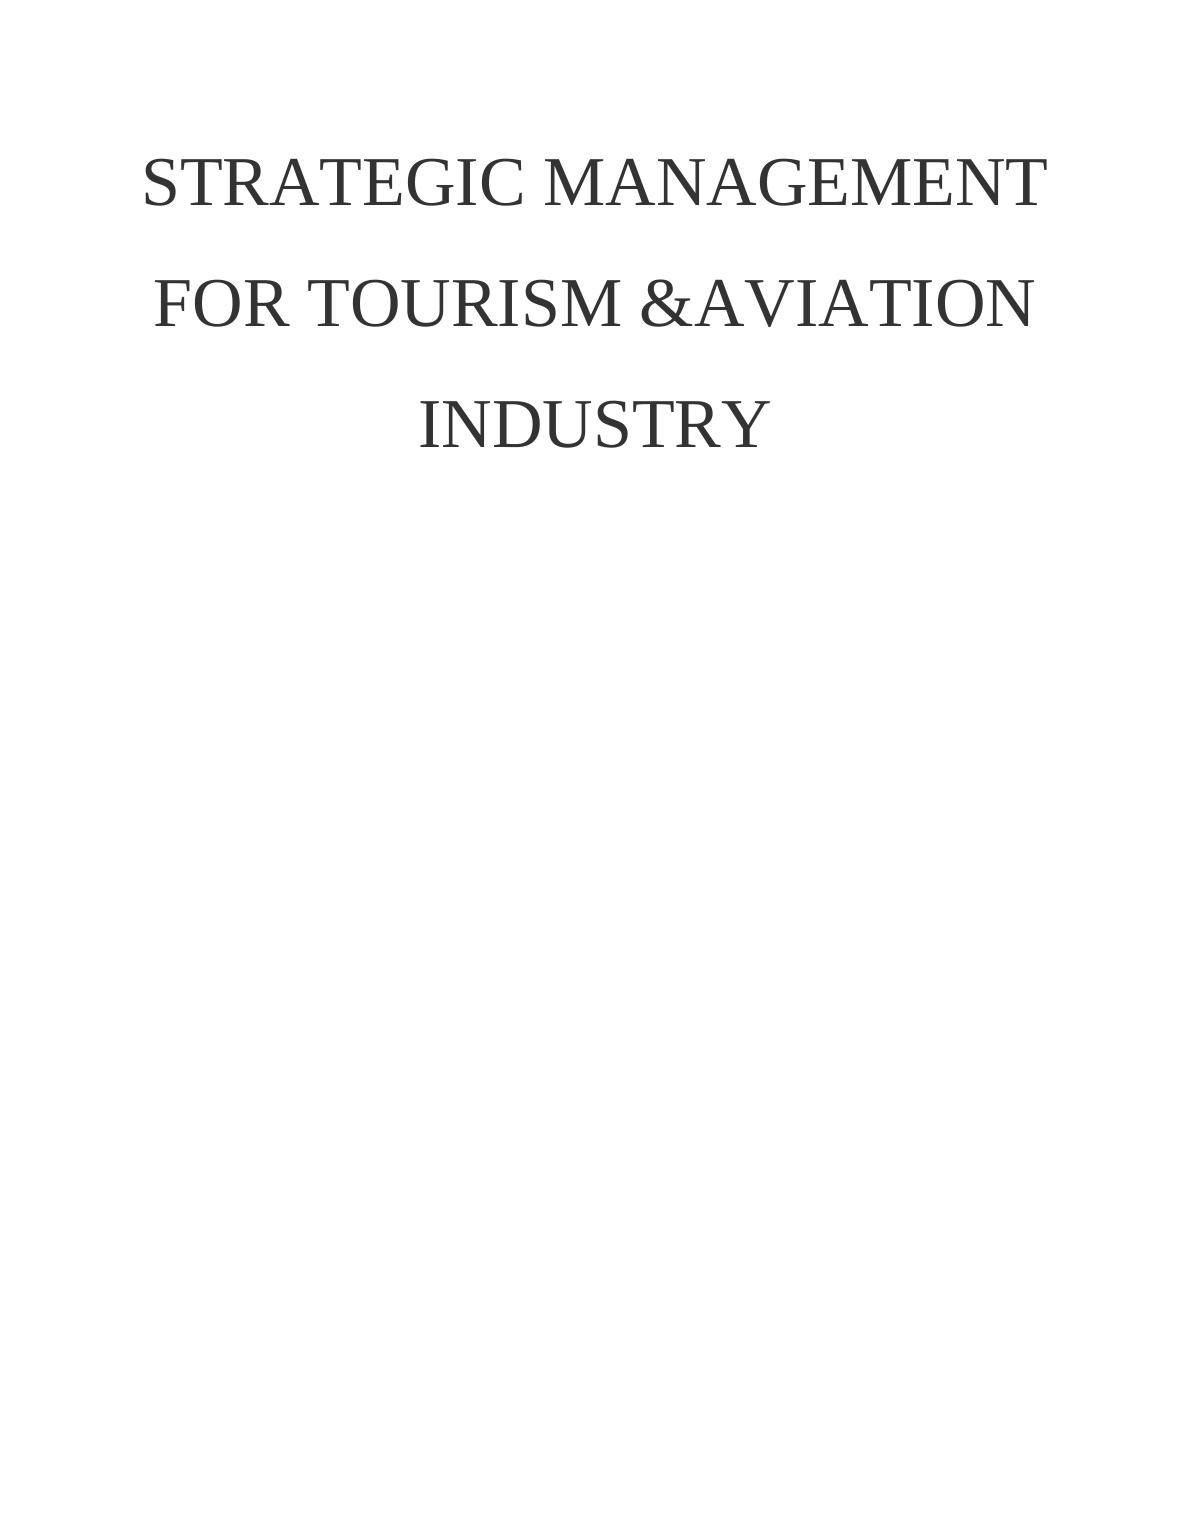 Strategic Management for Tourism and Aviation Industry_1